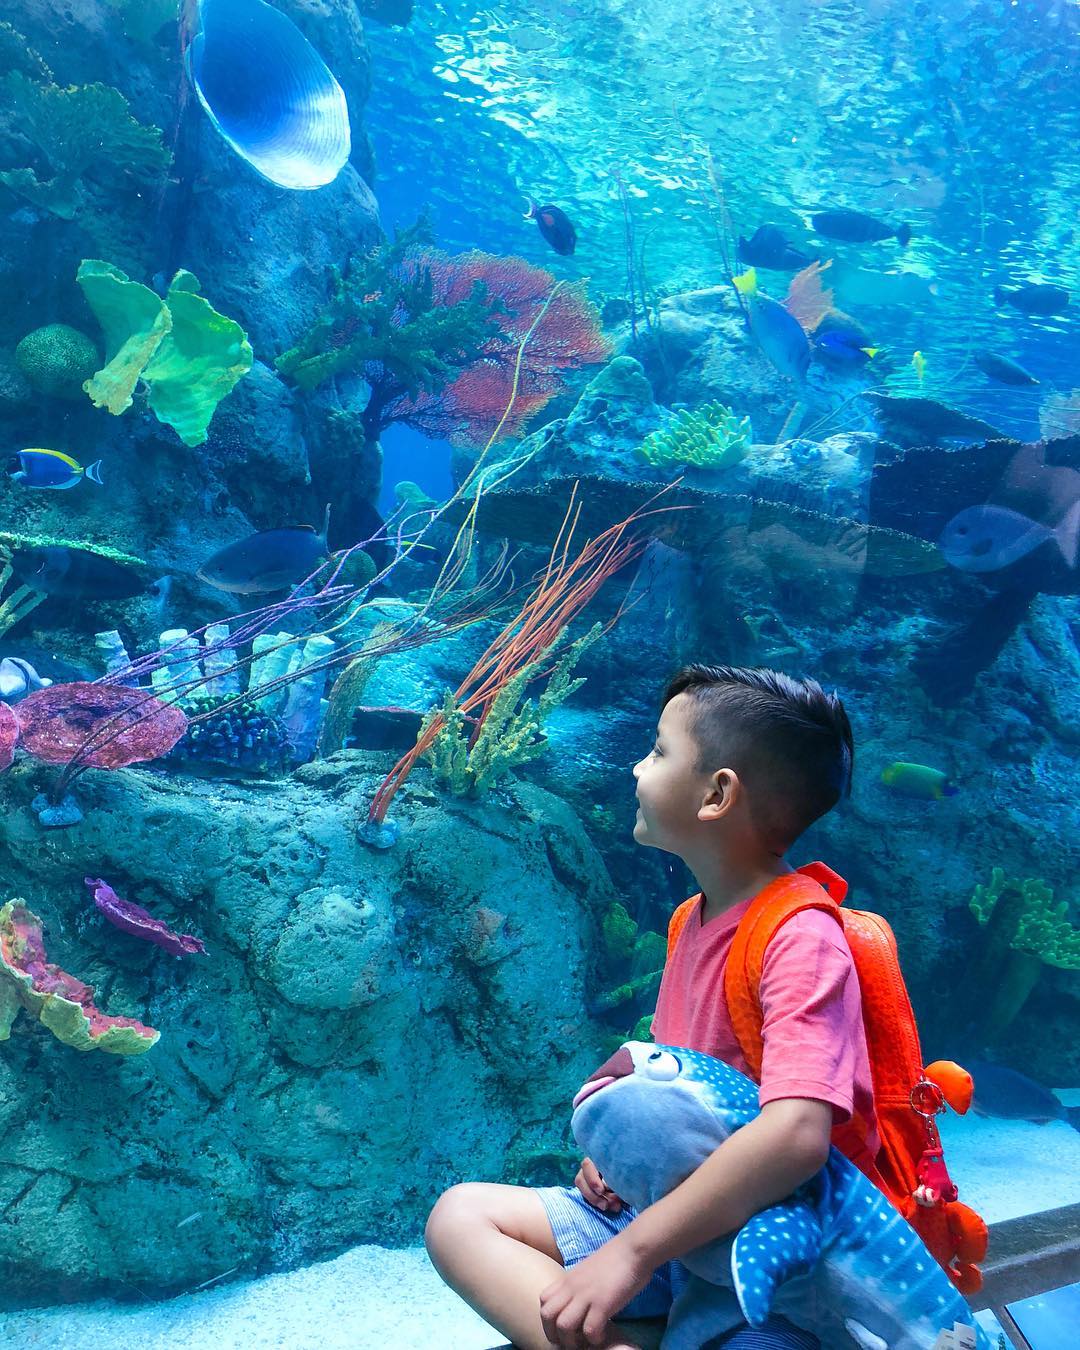 Child Viewing Fish in the Aquarium of the Pacific. Photo by Instagram user @z_from_york